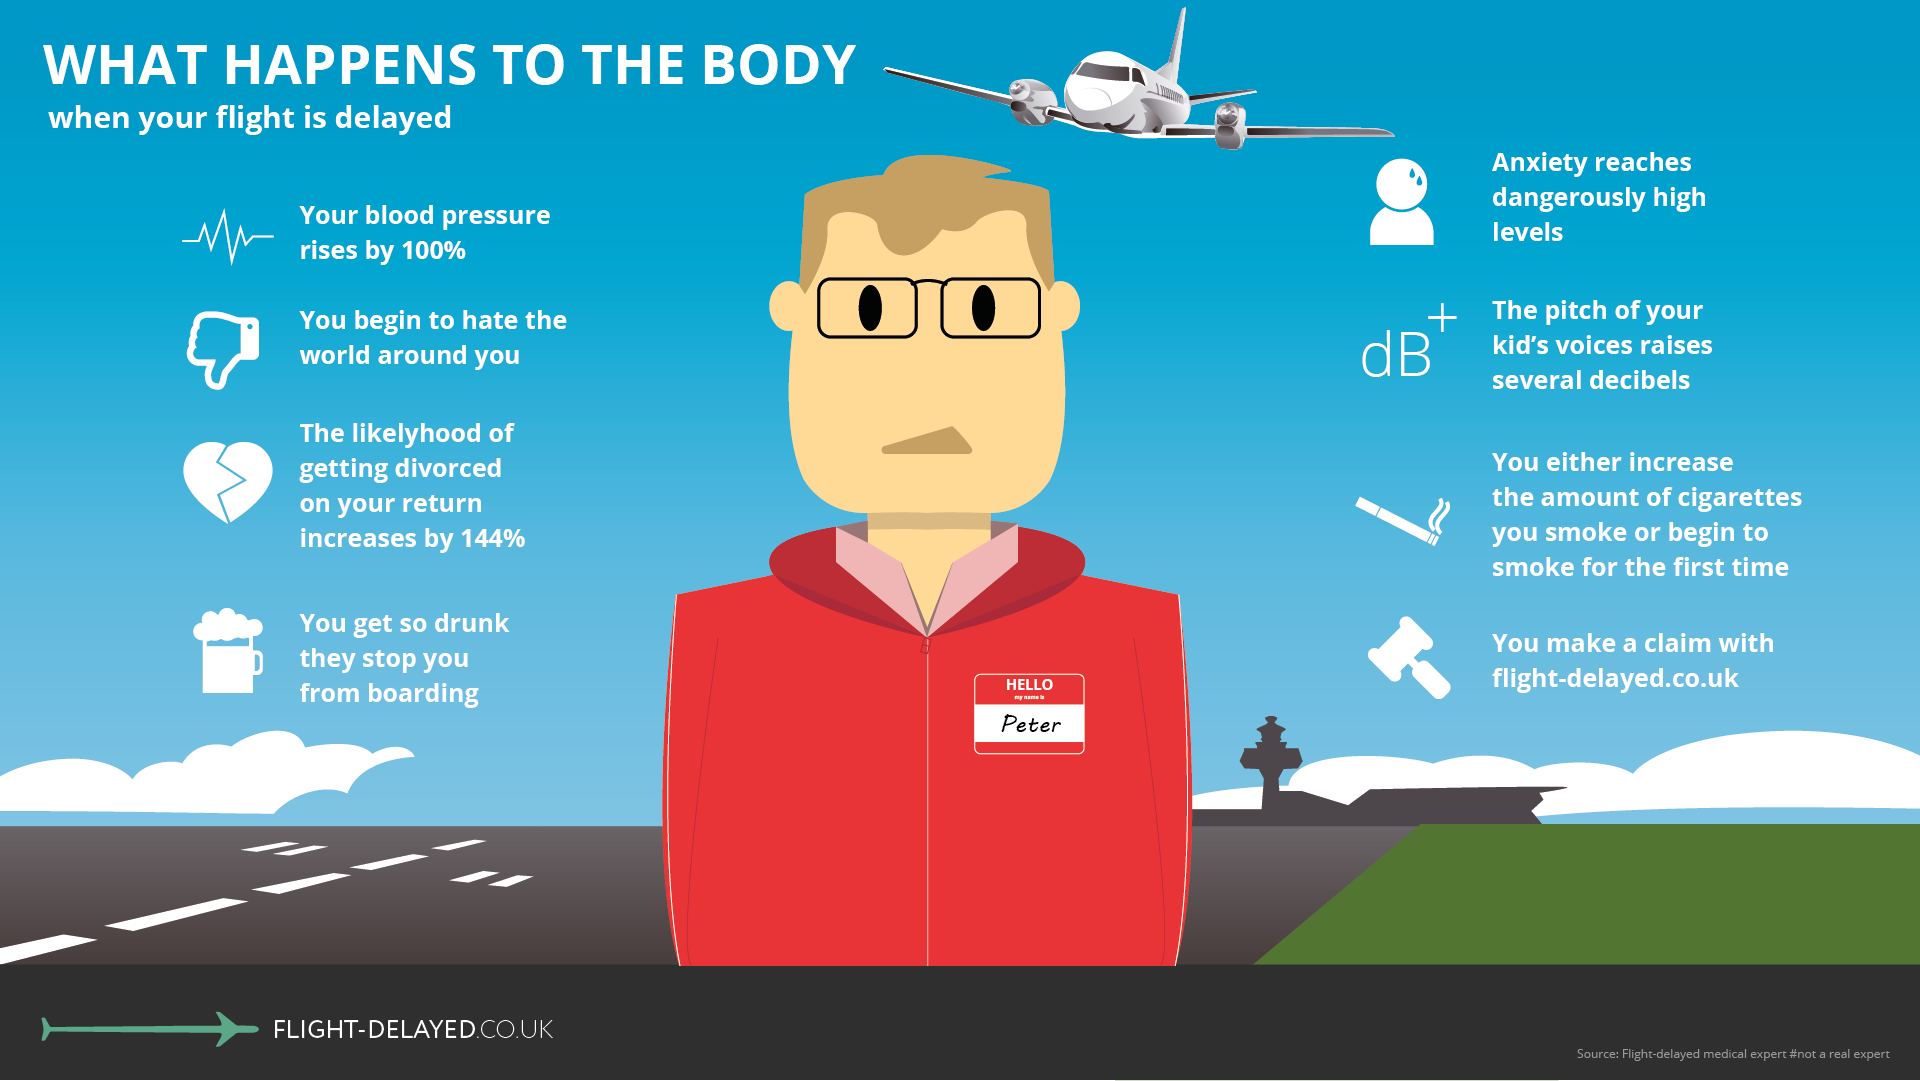 An info graphic demonstrating what happens to the body in the event of a flight delay